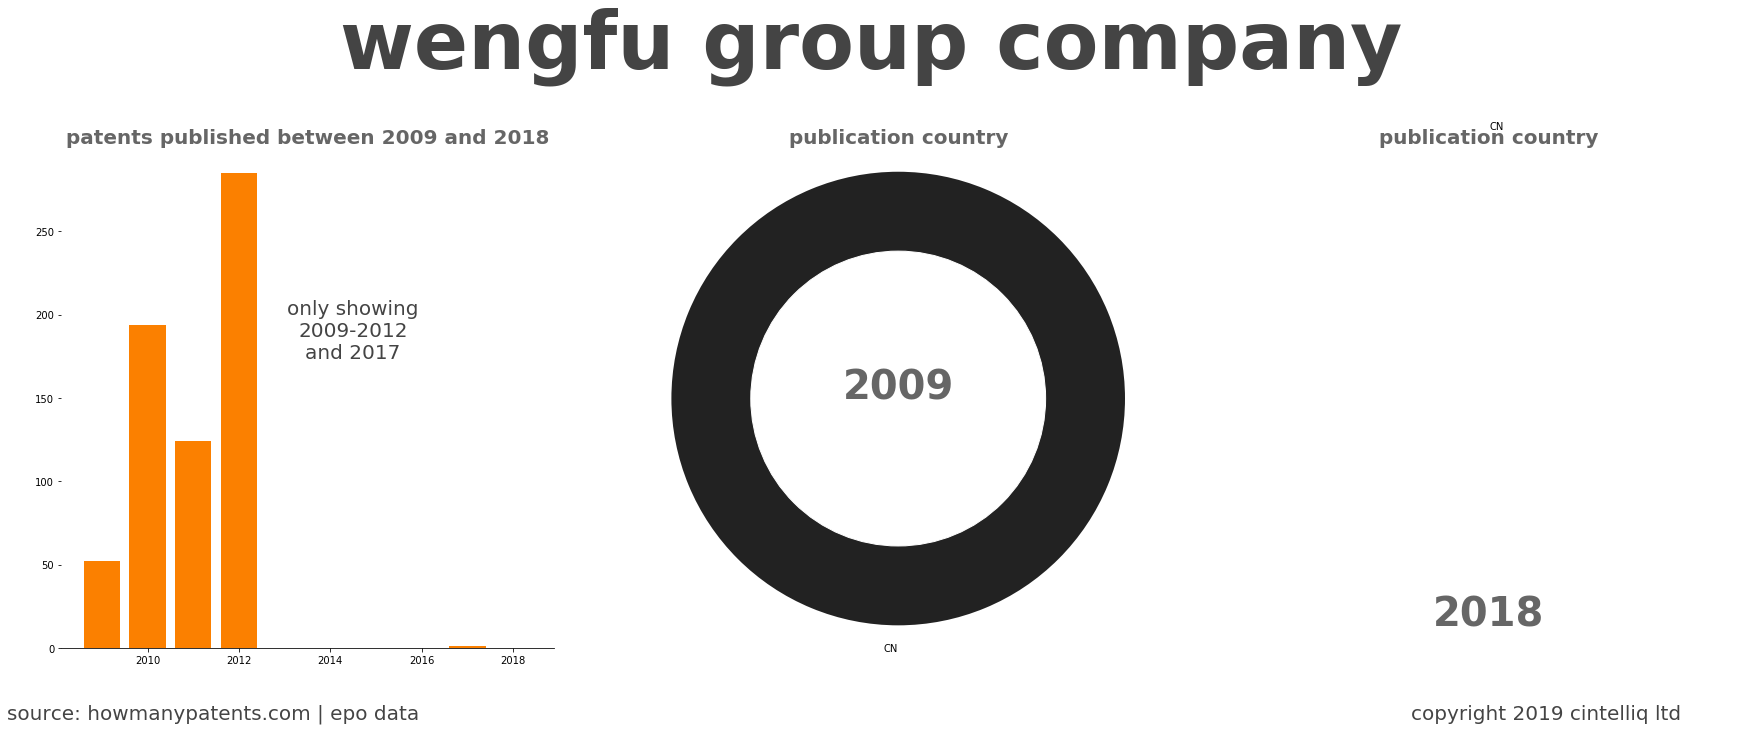 summary of patents for Wengfu Group Company